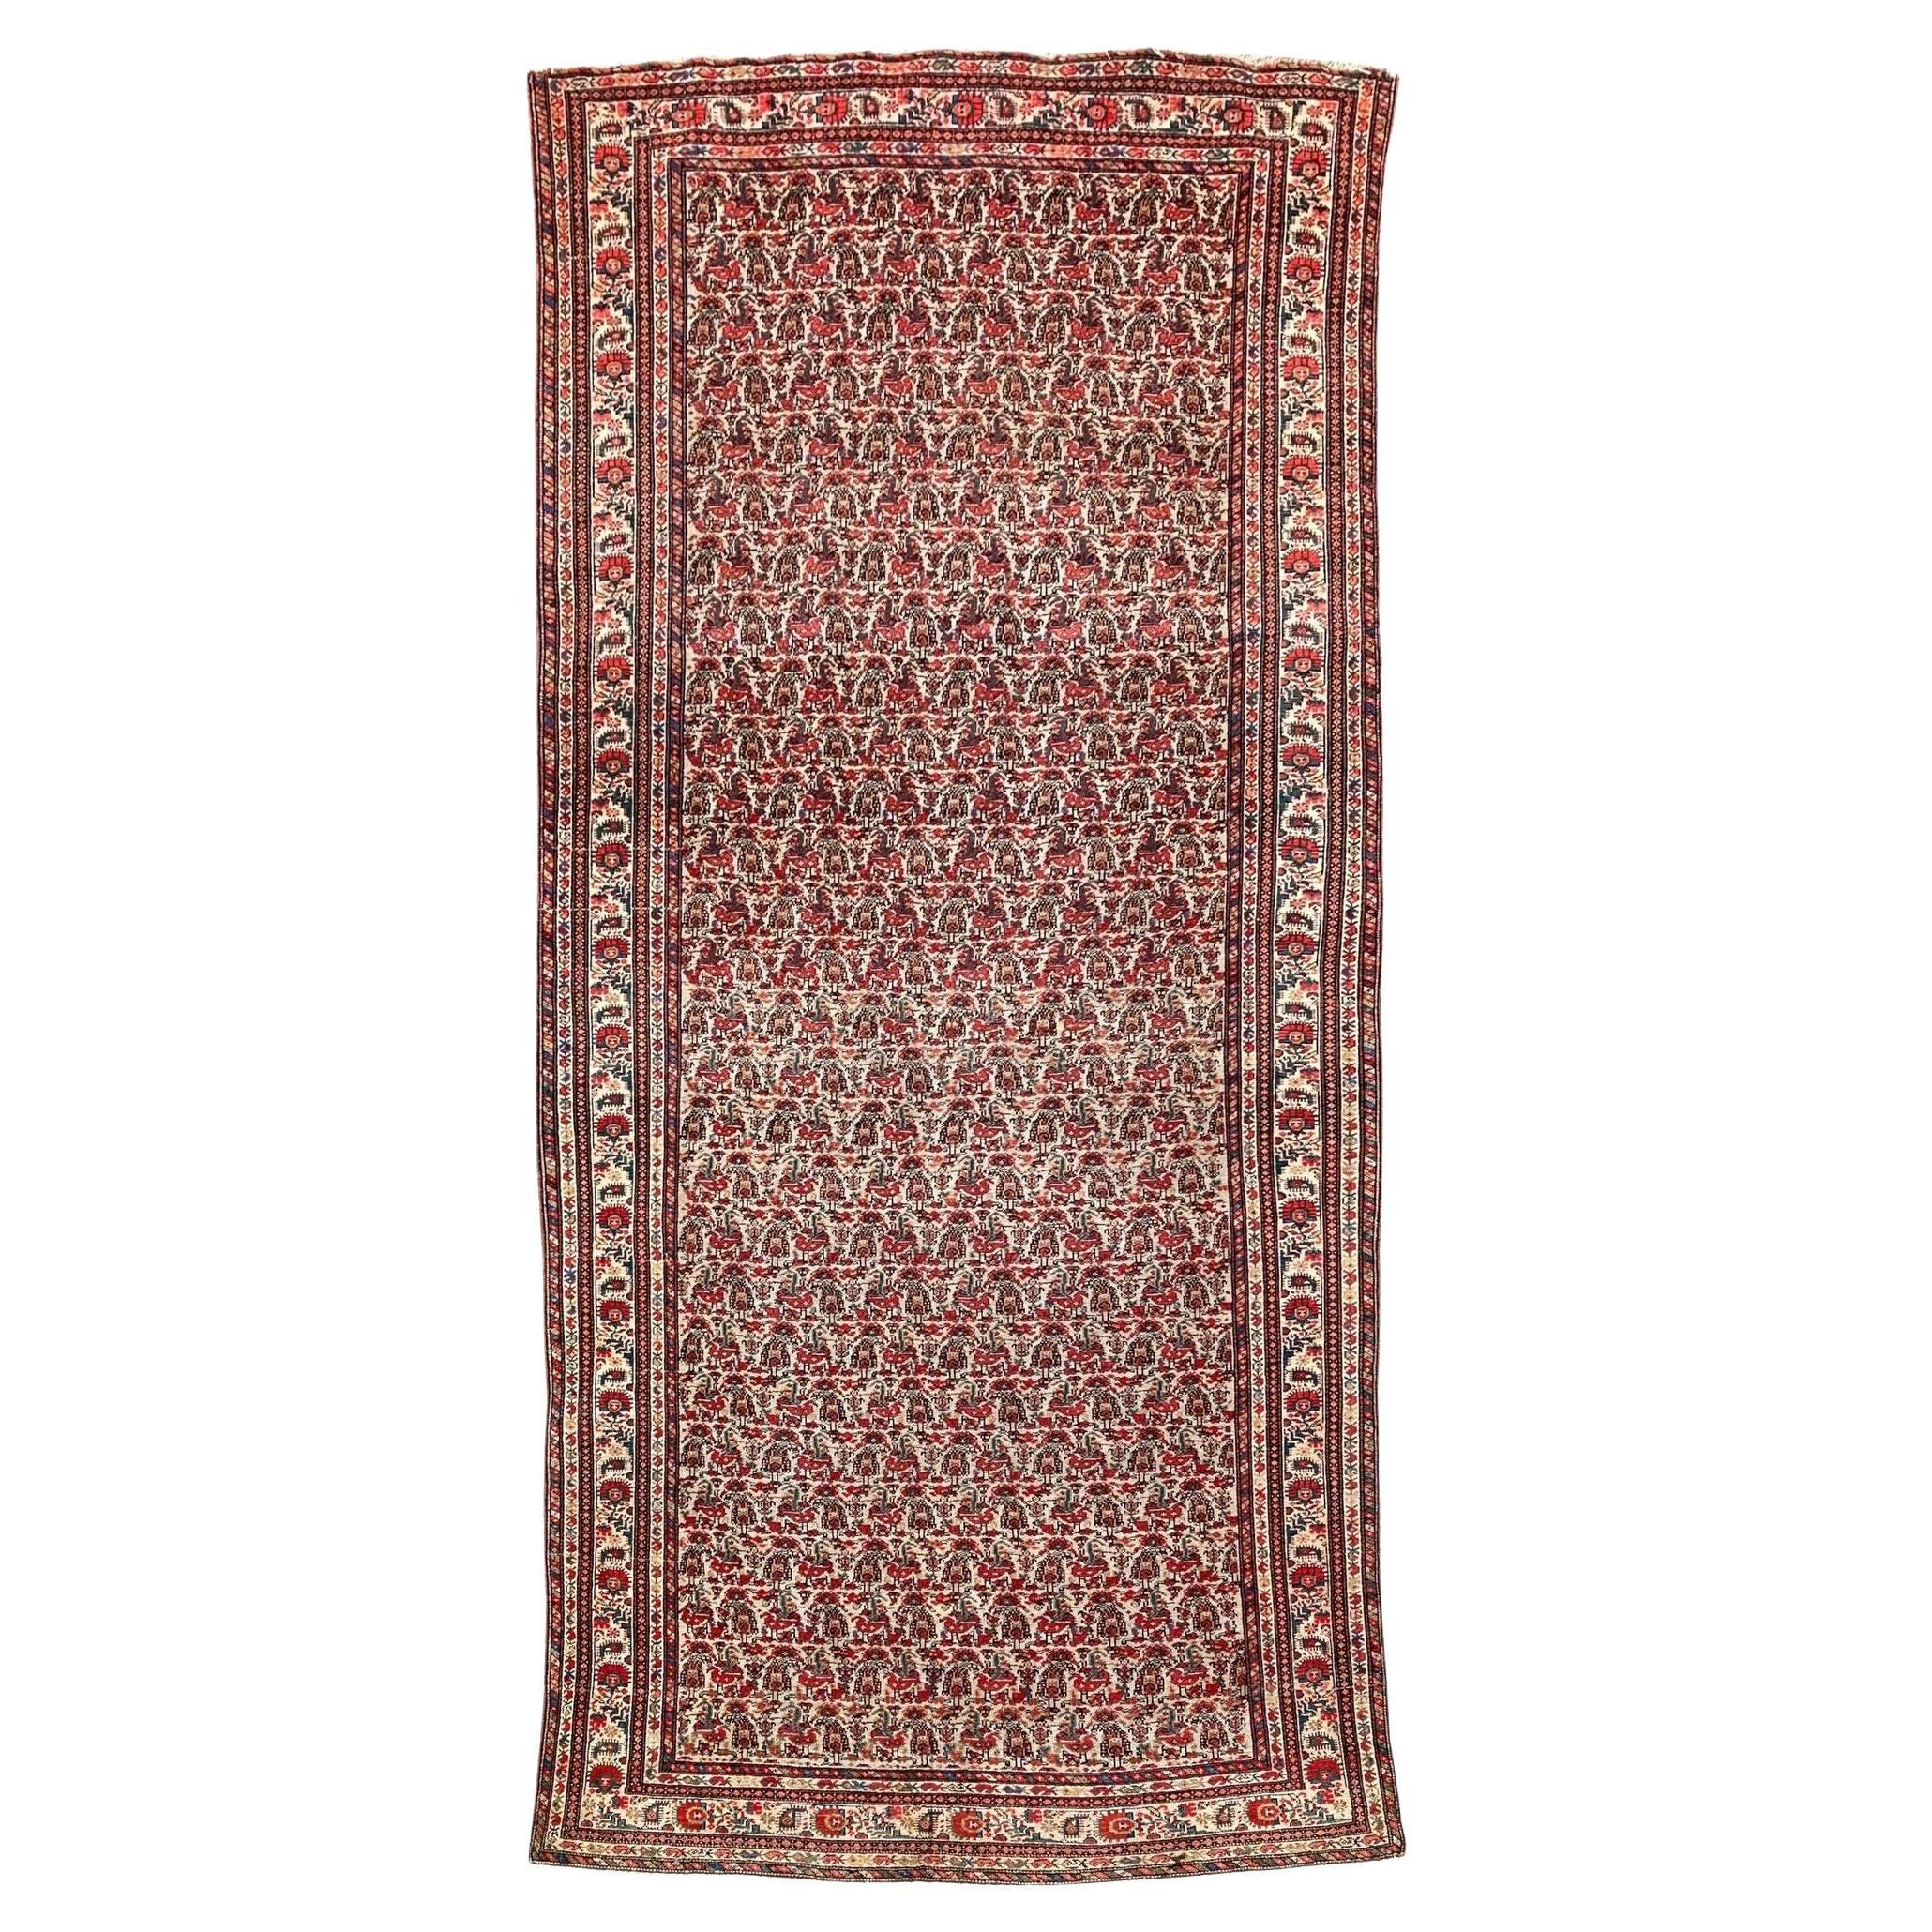 Antique Malayer Runner 2.86m X 1.38m For Sale